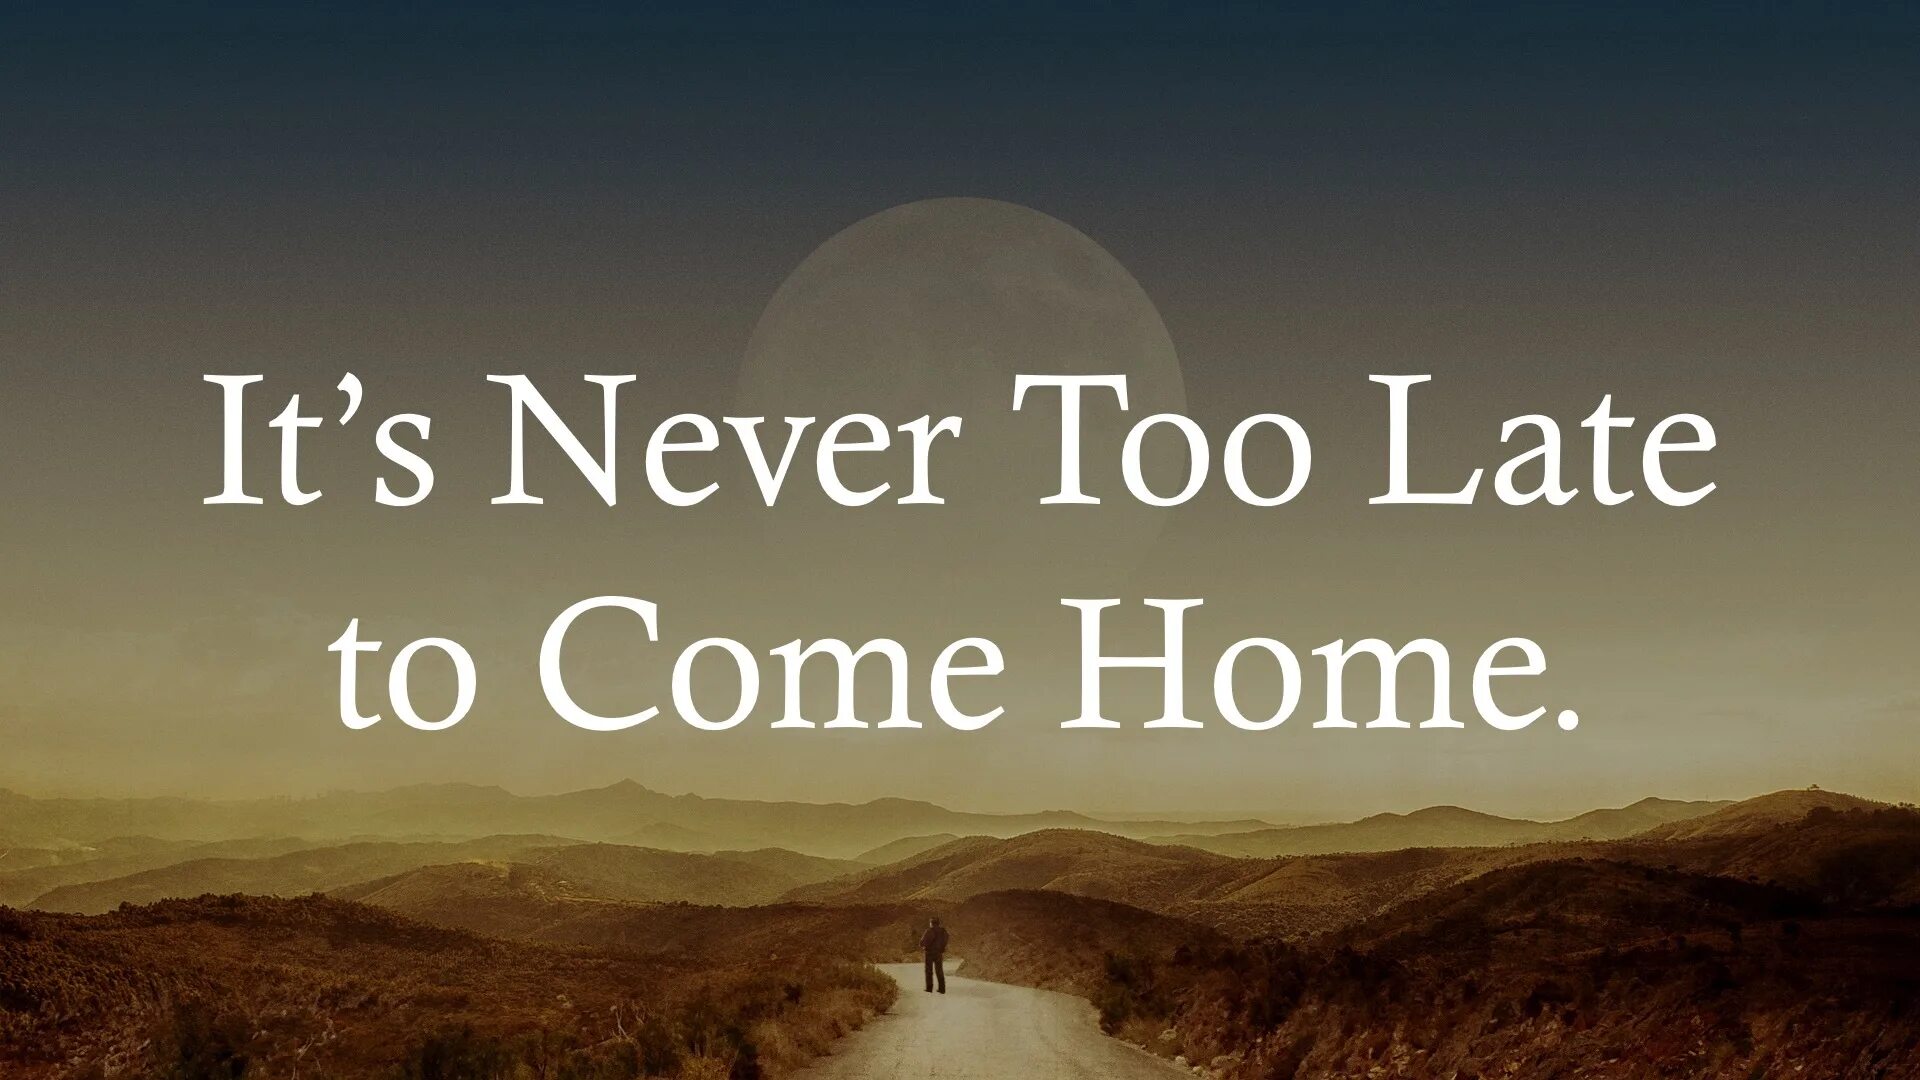 It's never too late. Never to late. Never late to learn. Come Home late.